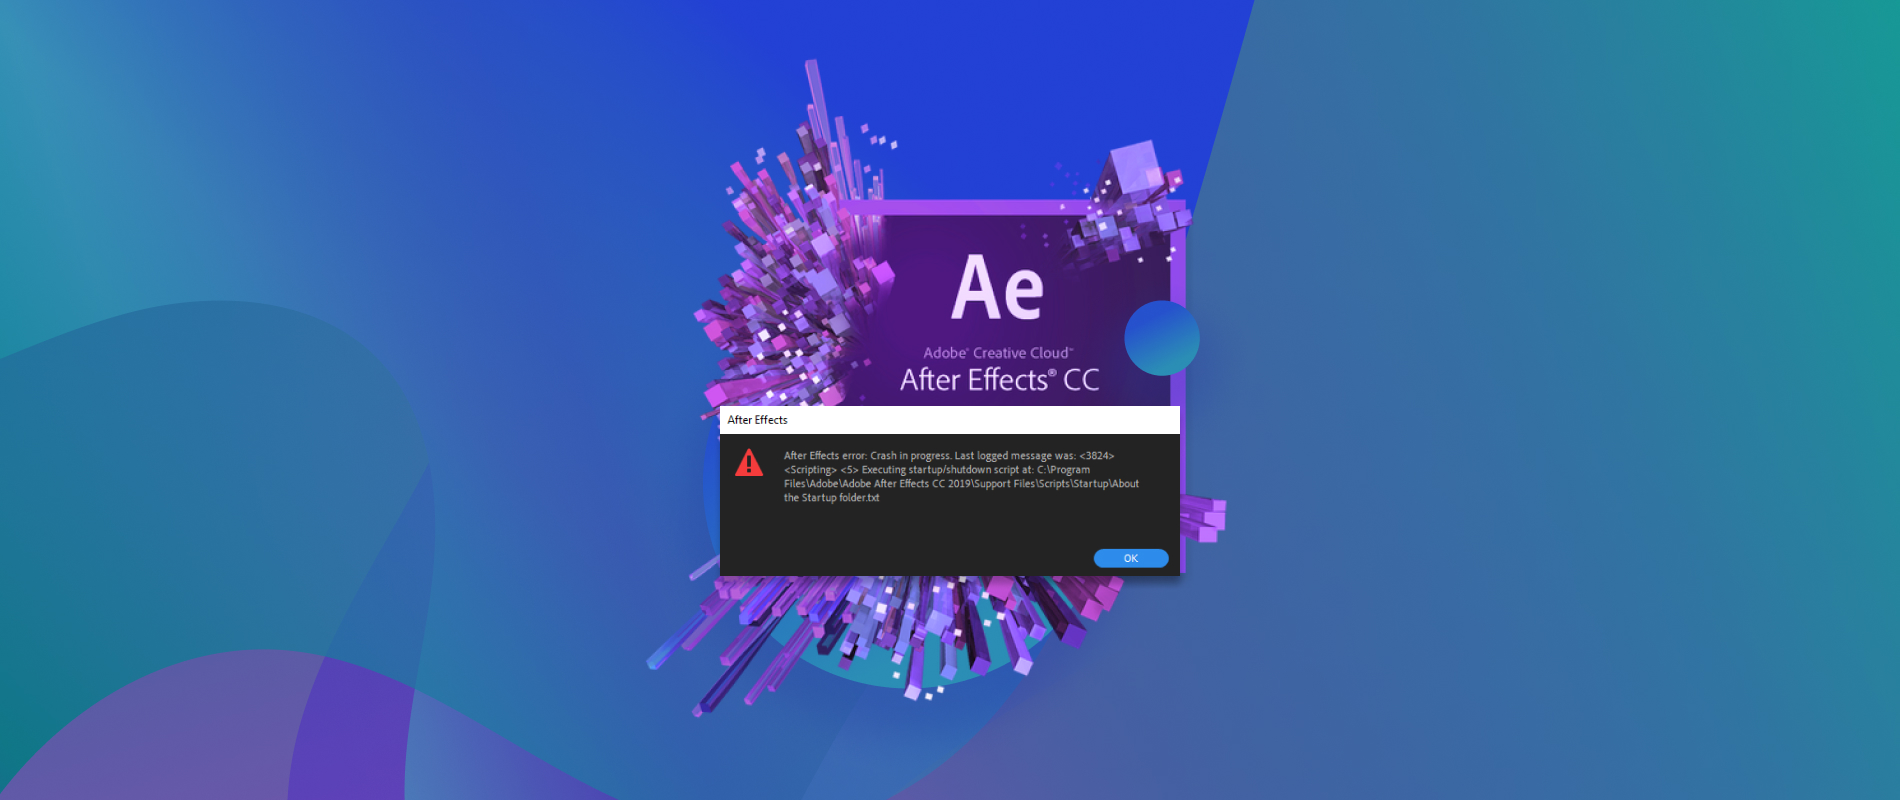 Support effect. Проекты Афтер эффект. Adobe after Effects Projects Medical.